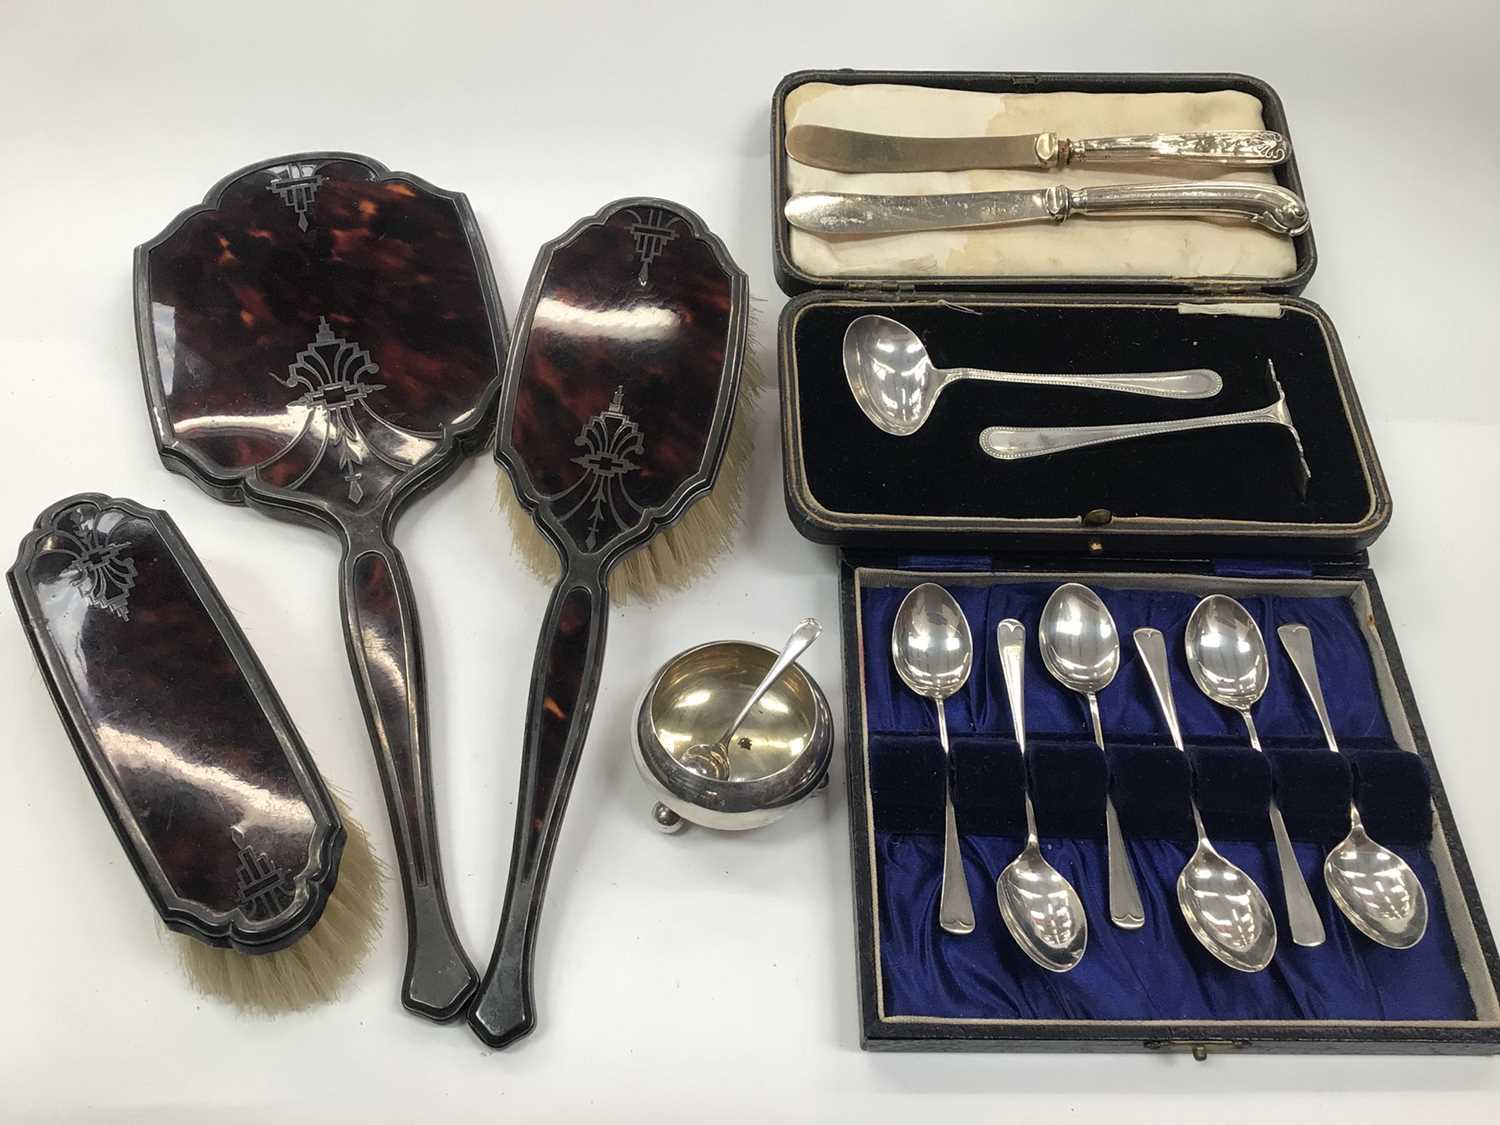 Tortoiseshell and silver hand mirror and brushes, together with silver teaspoons and other items